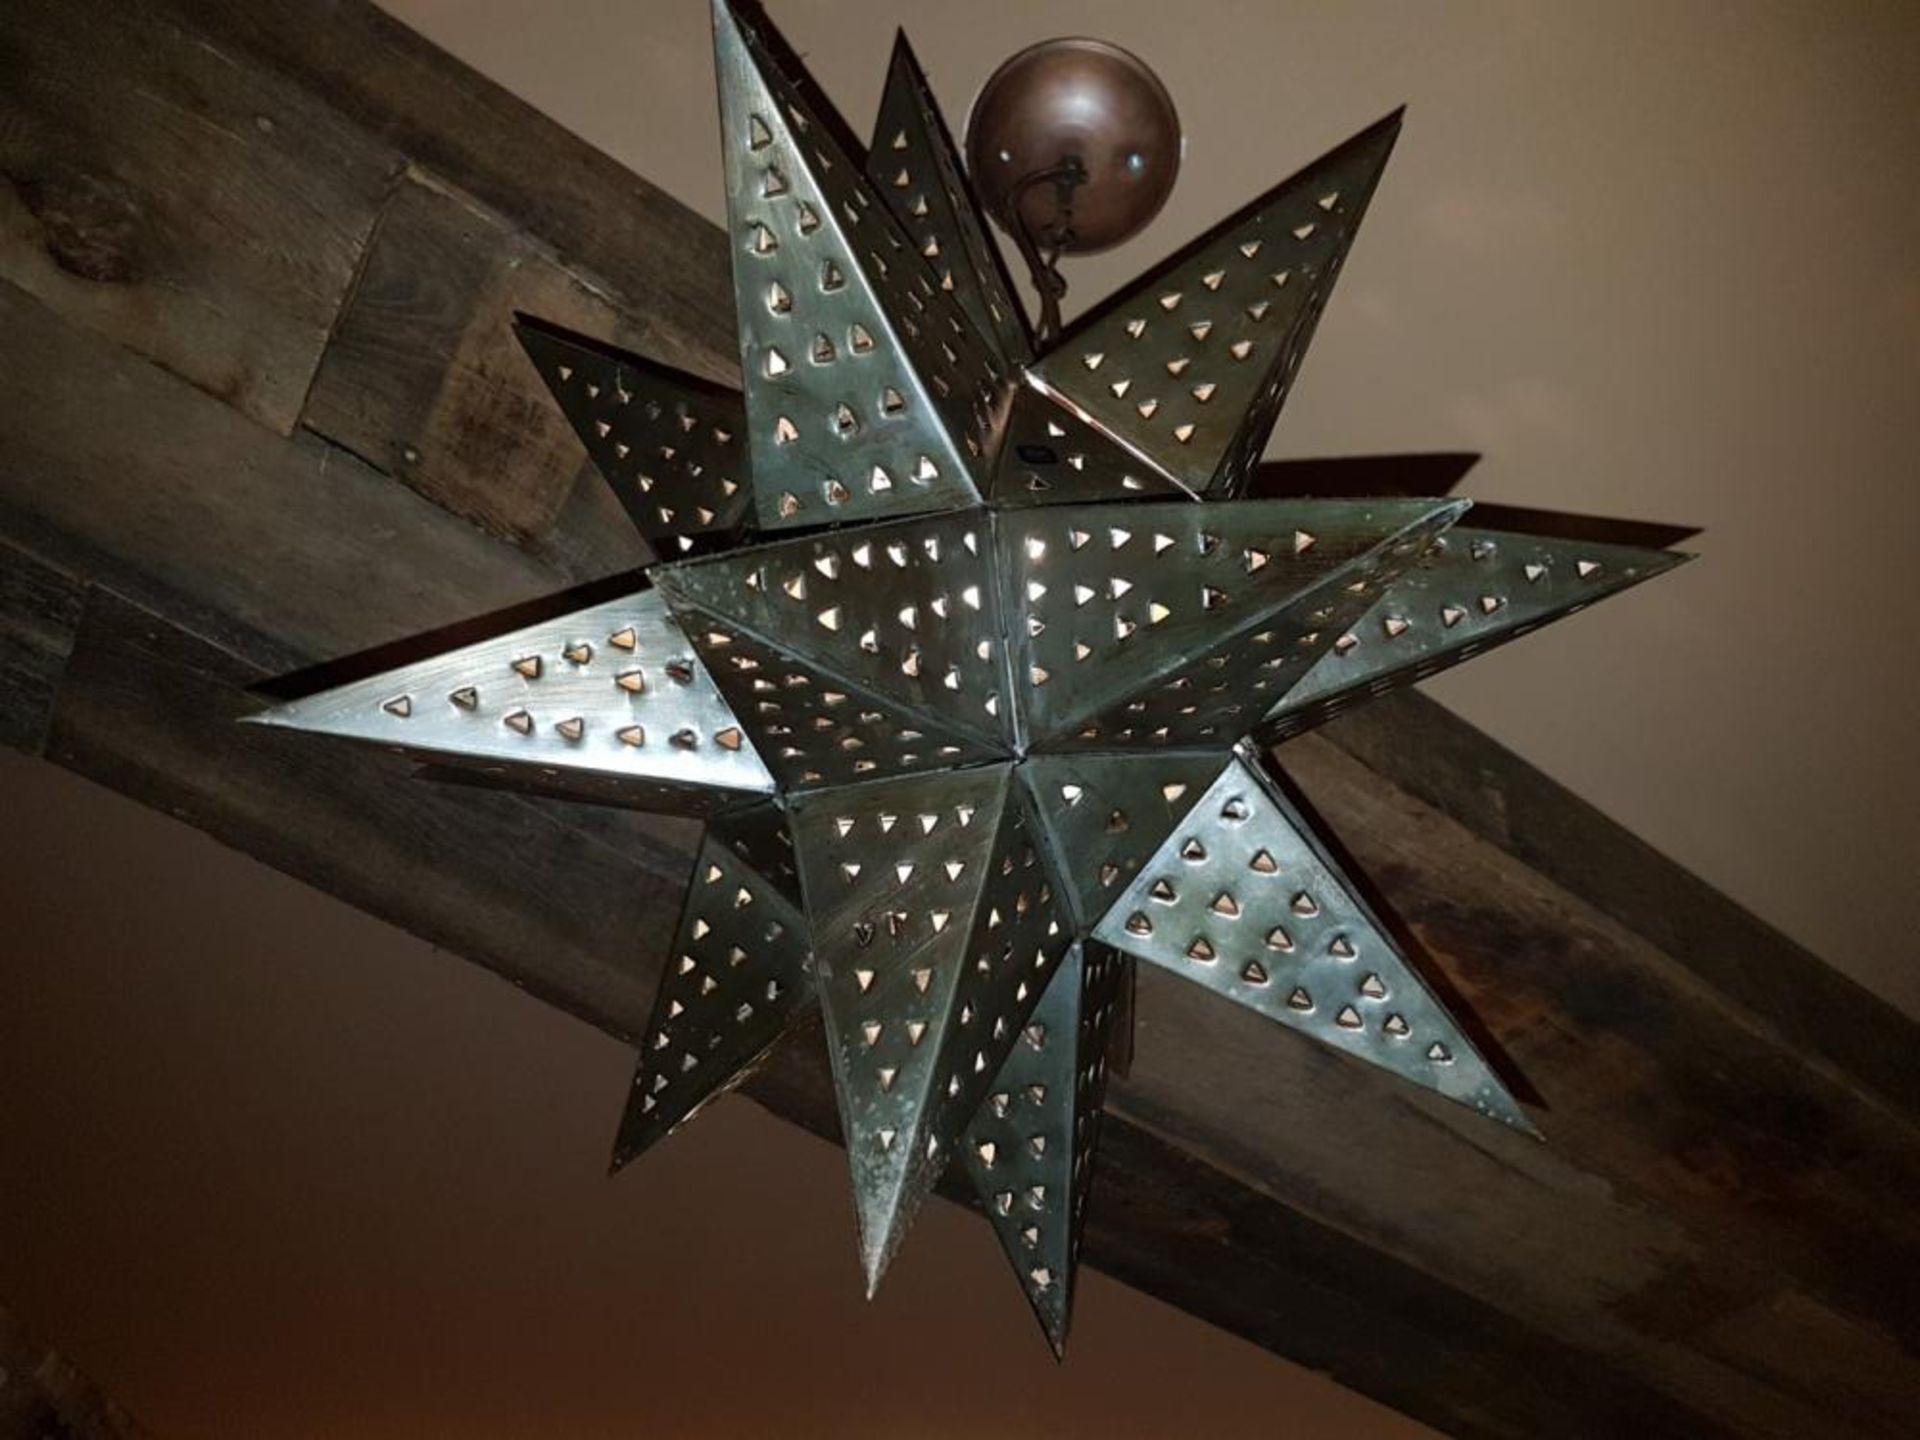 2 x Perforated Metal Star Shaped Pendant Light Fittings - 80cm Drop x 40cm Diameter - CL796 - Ref: - Image 2 of 3